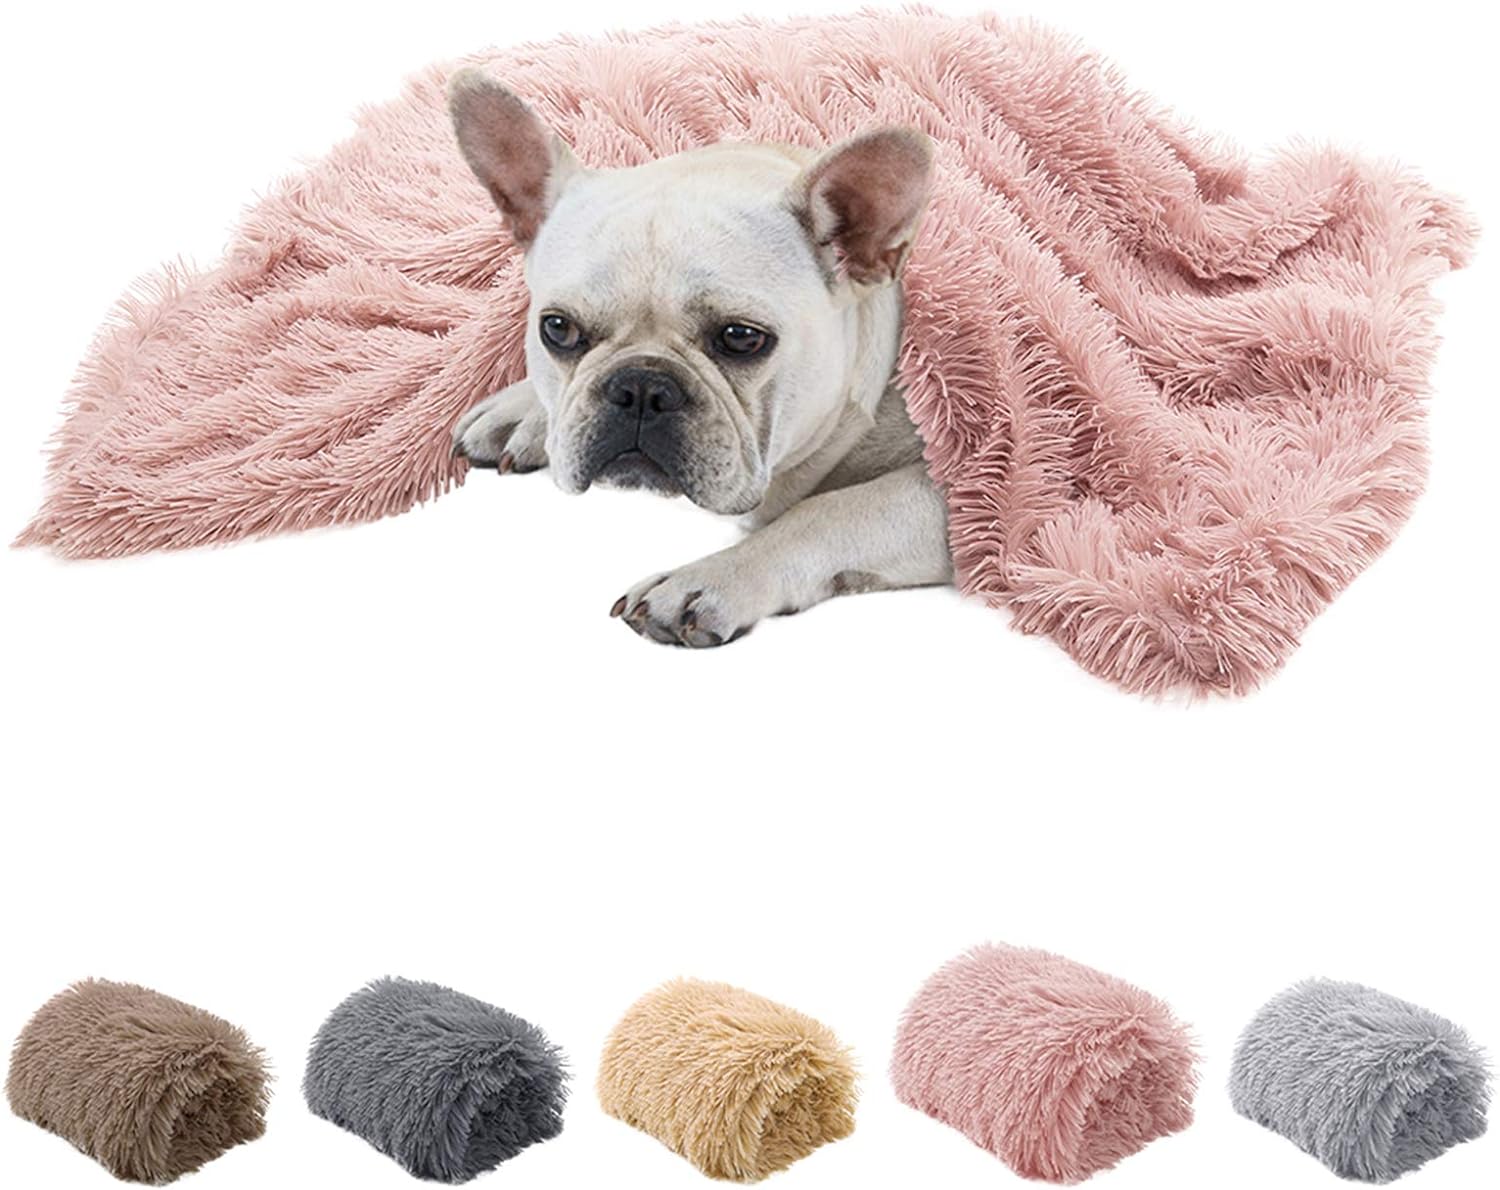 Comfort Your Furry Friend This Winter: Why The Pawsse Dog Blanket Is A Must-Have